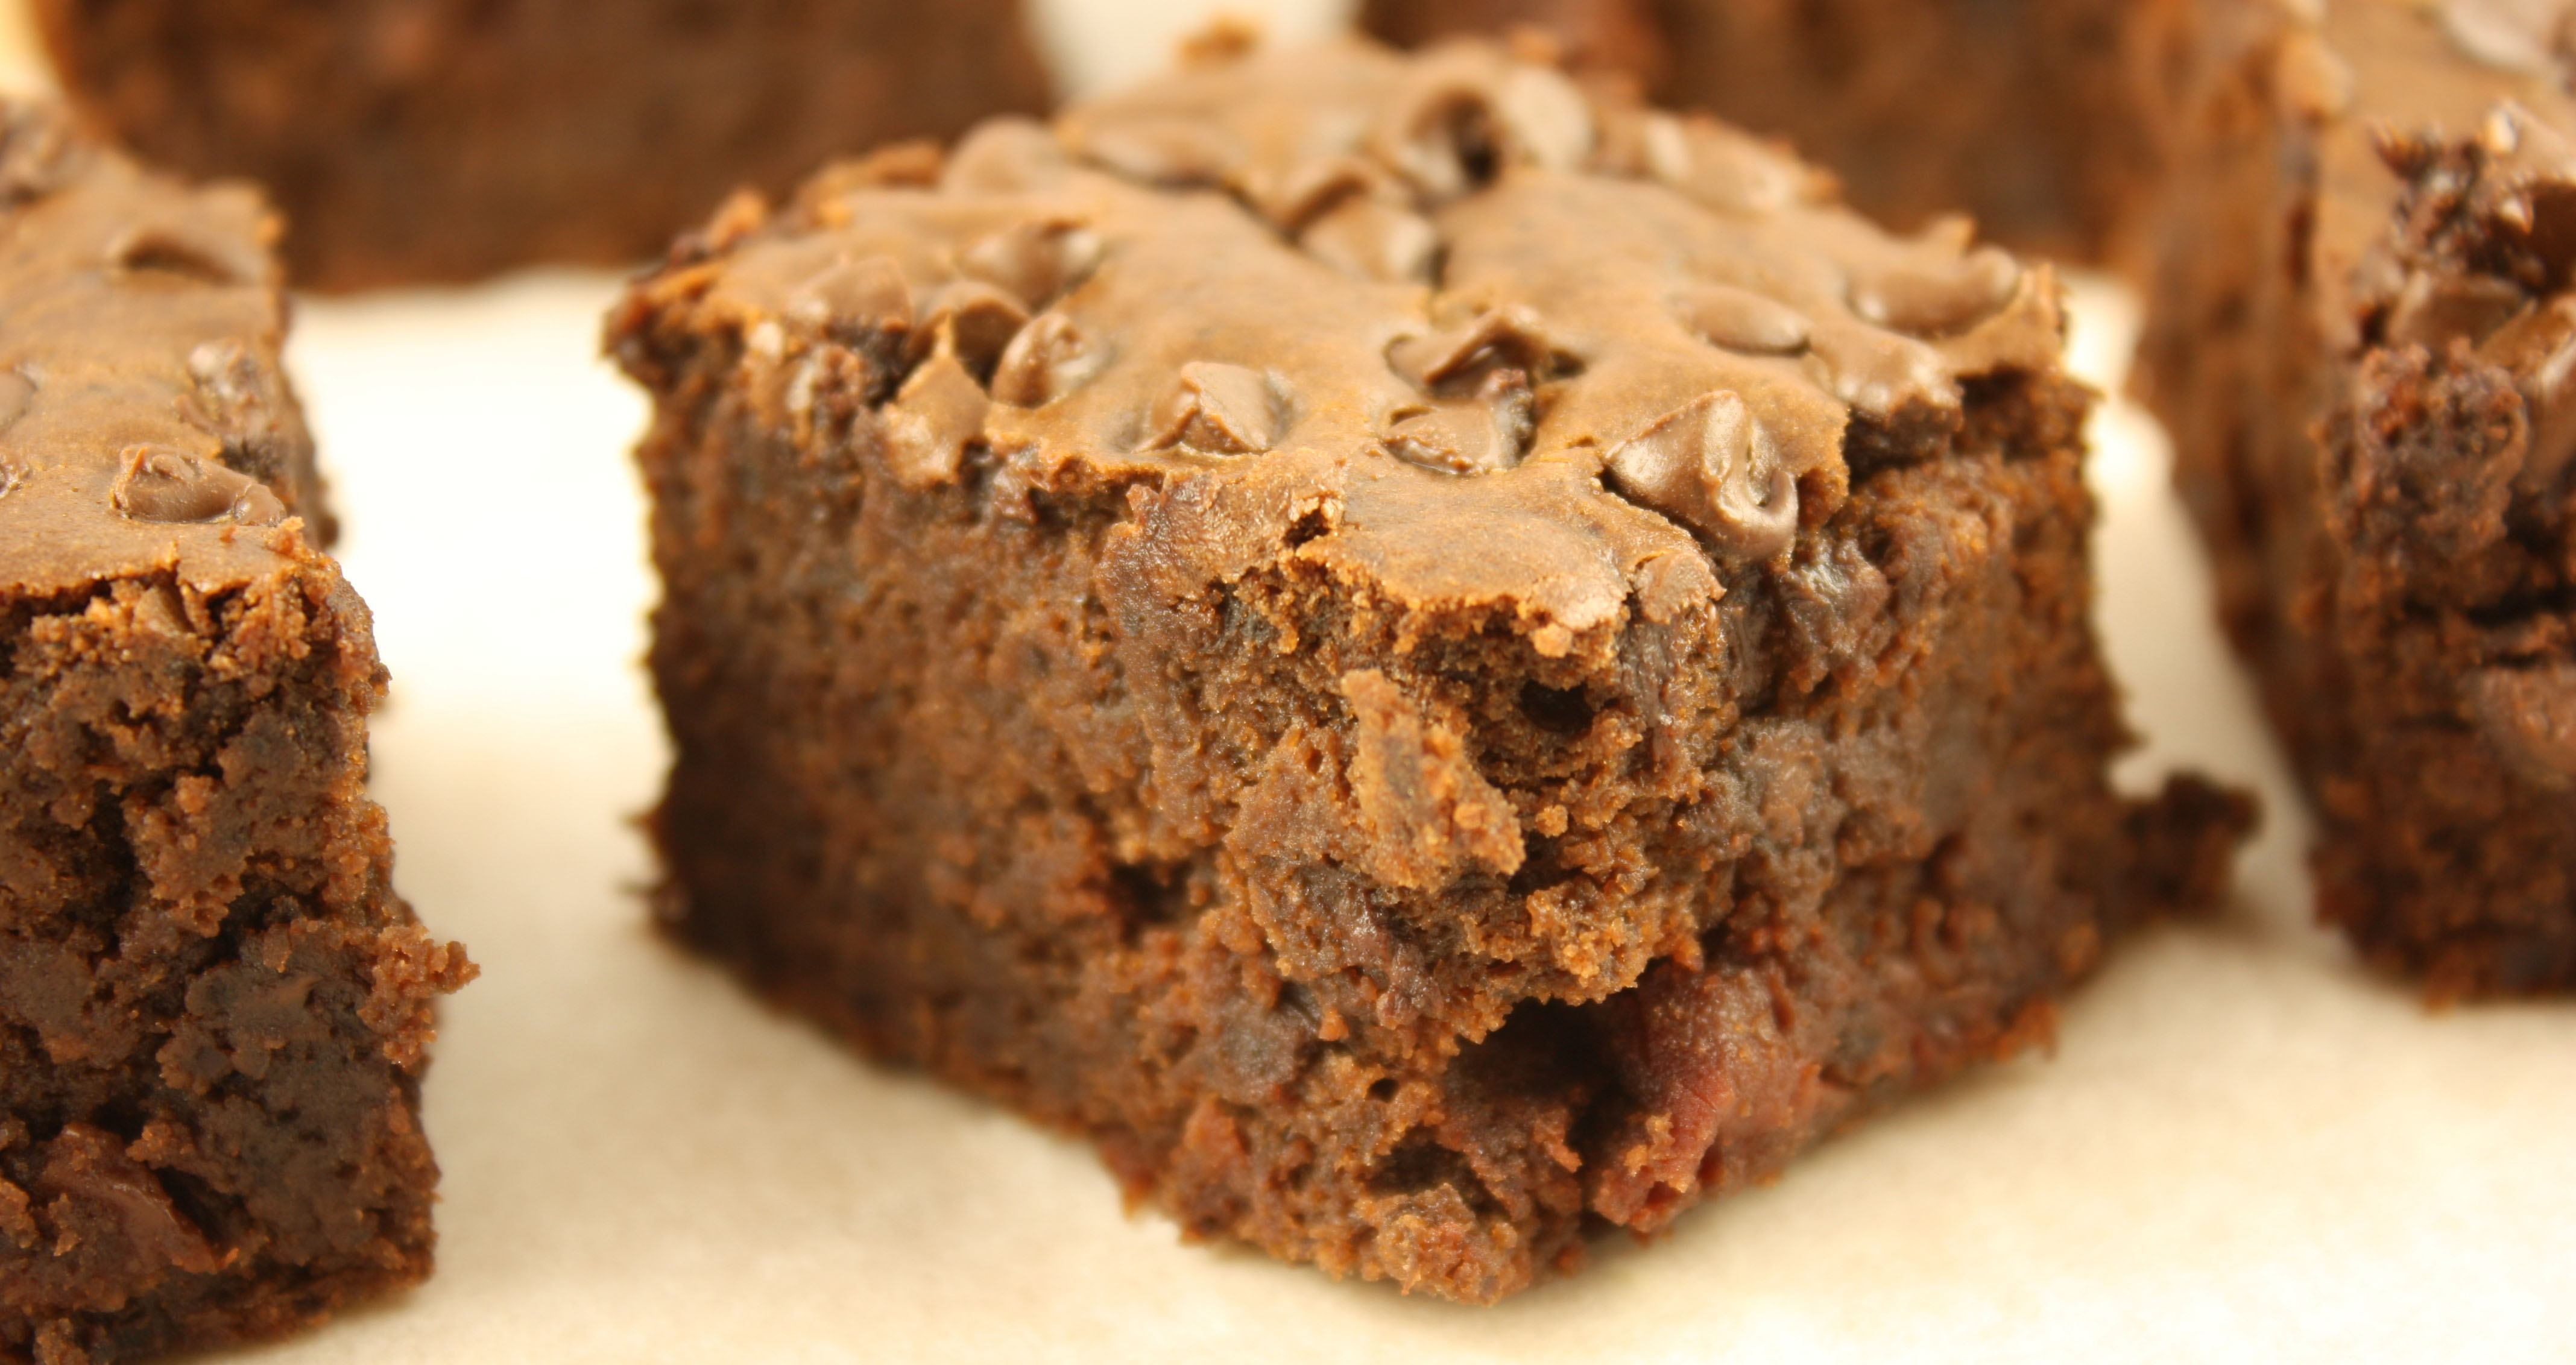 An image of the fudgy bean brownie recipe